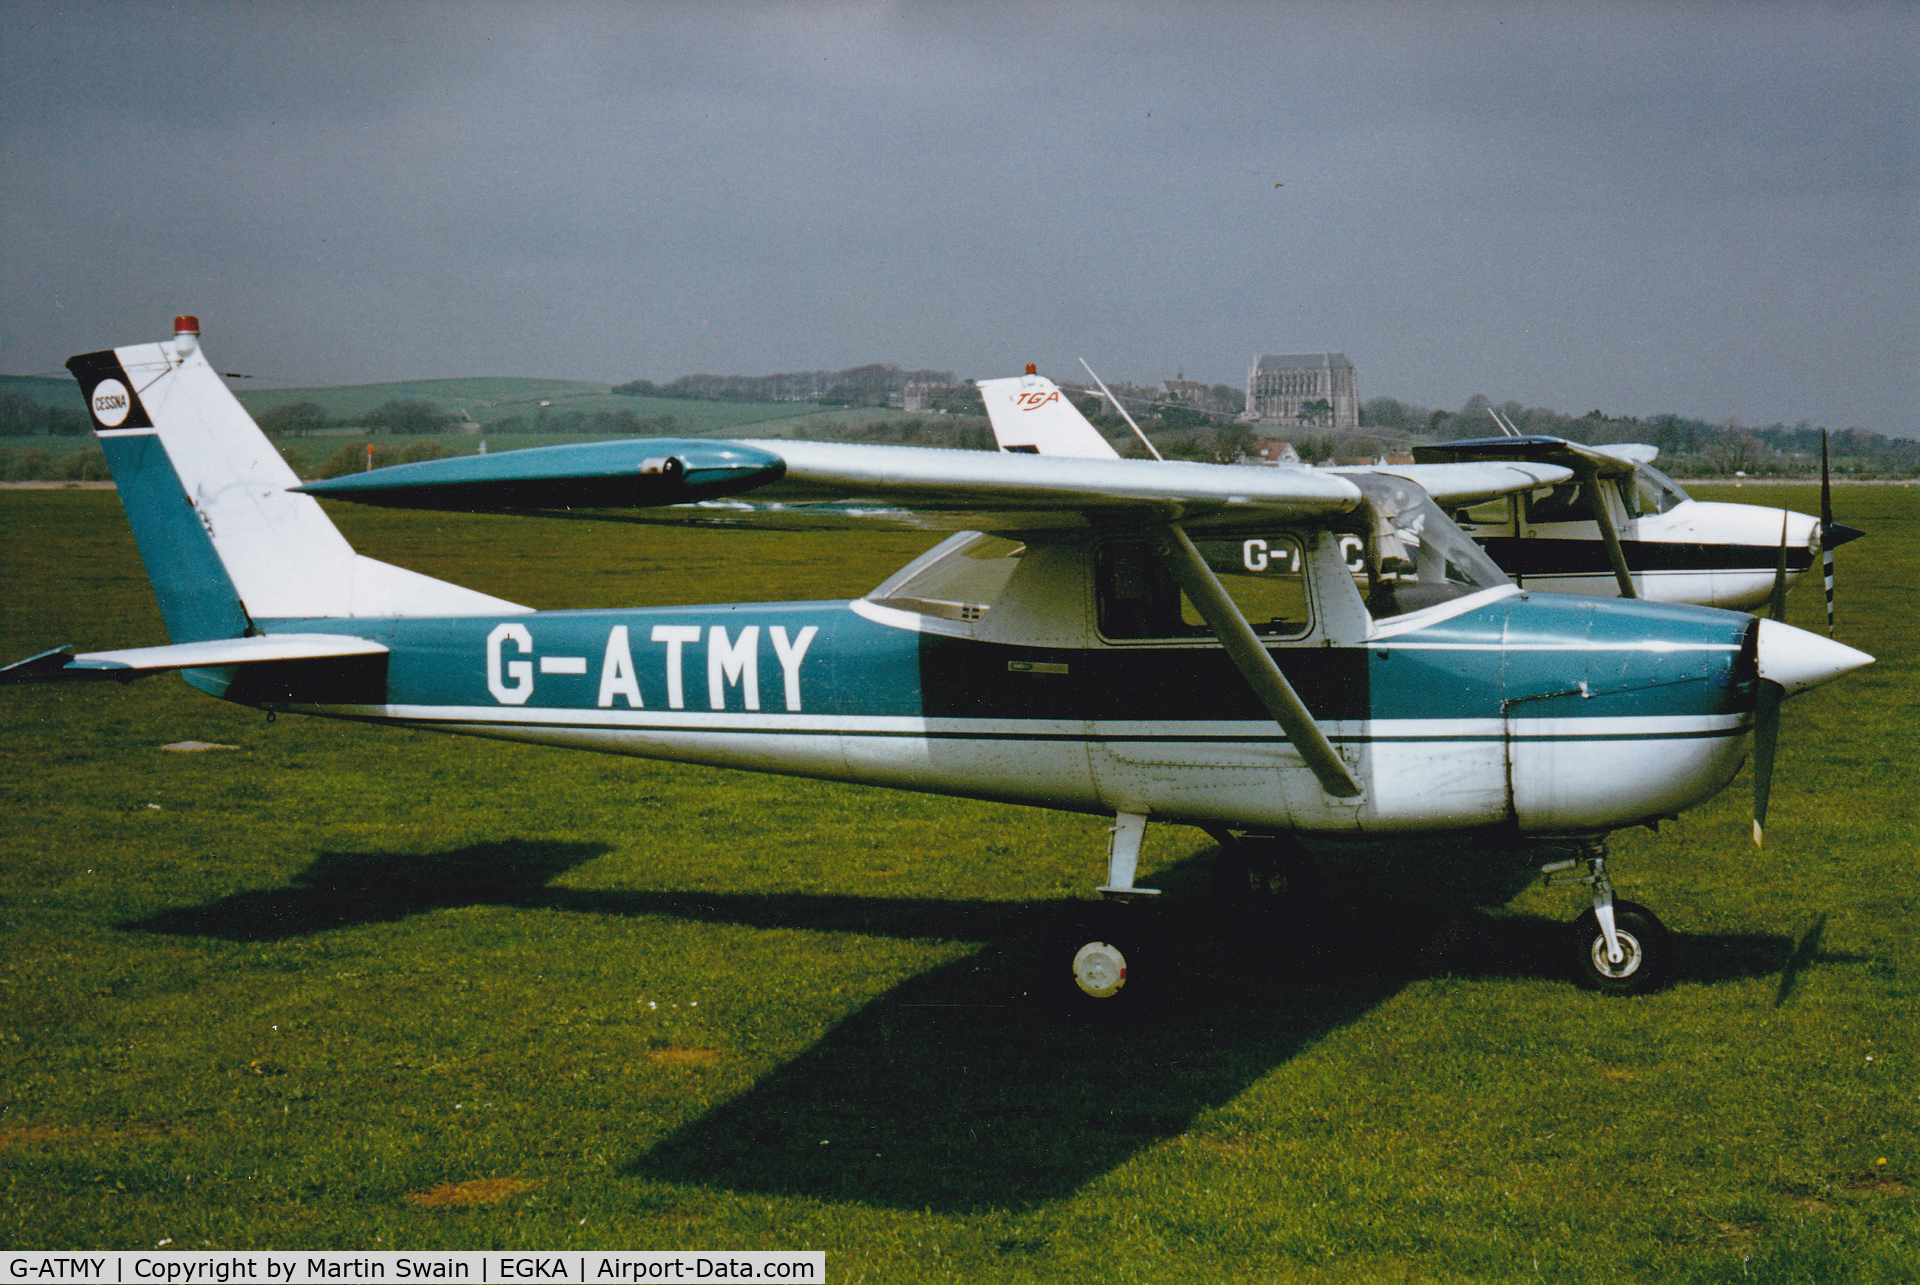 G-ATMY, 1965 Cessna 150F C/N 150-62642, Cessna 150F at Shoreham belonging to Toon Ghose Aviation, Later Southern Aero Club circa 1980.